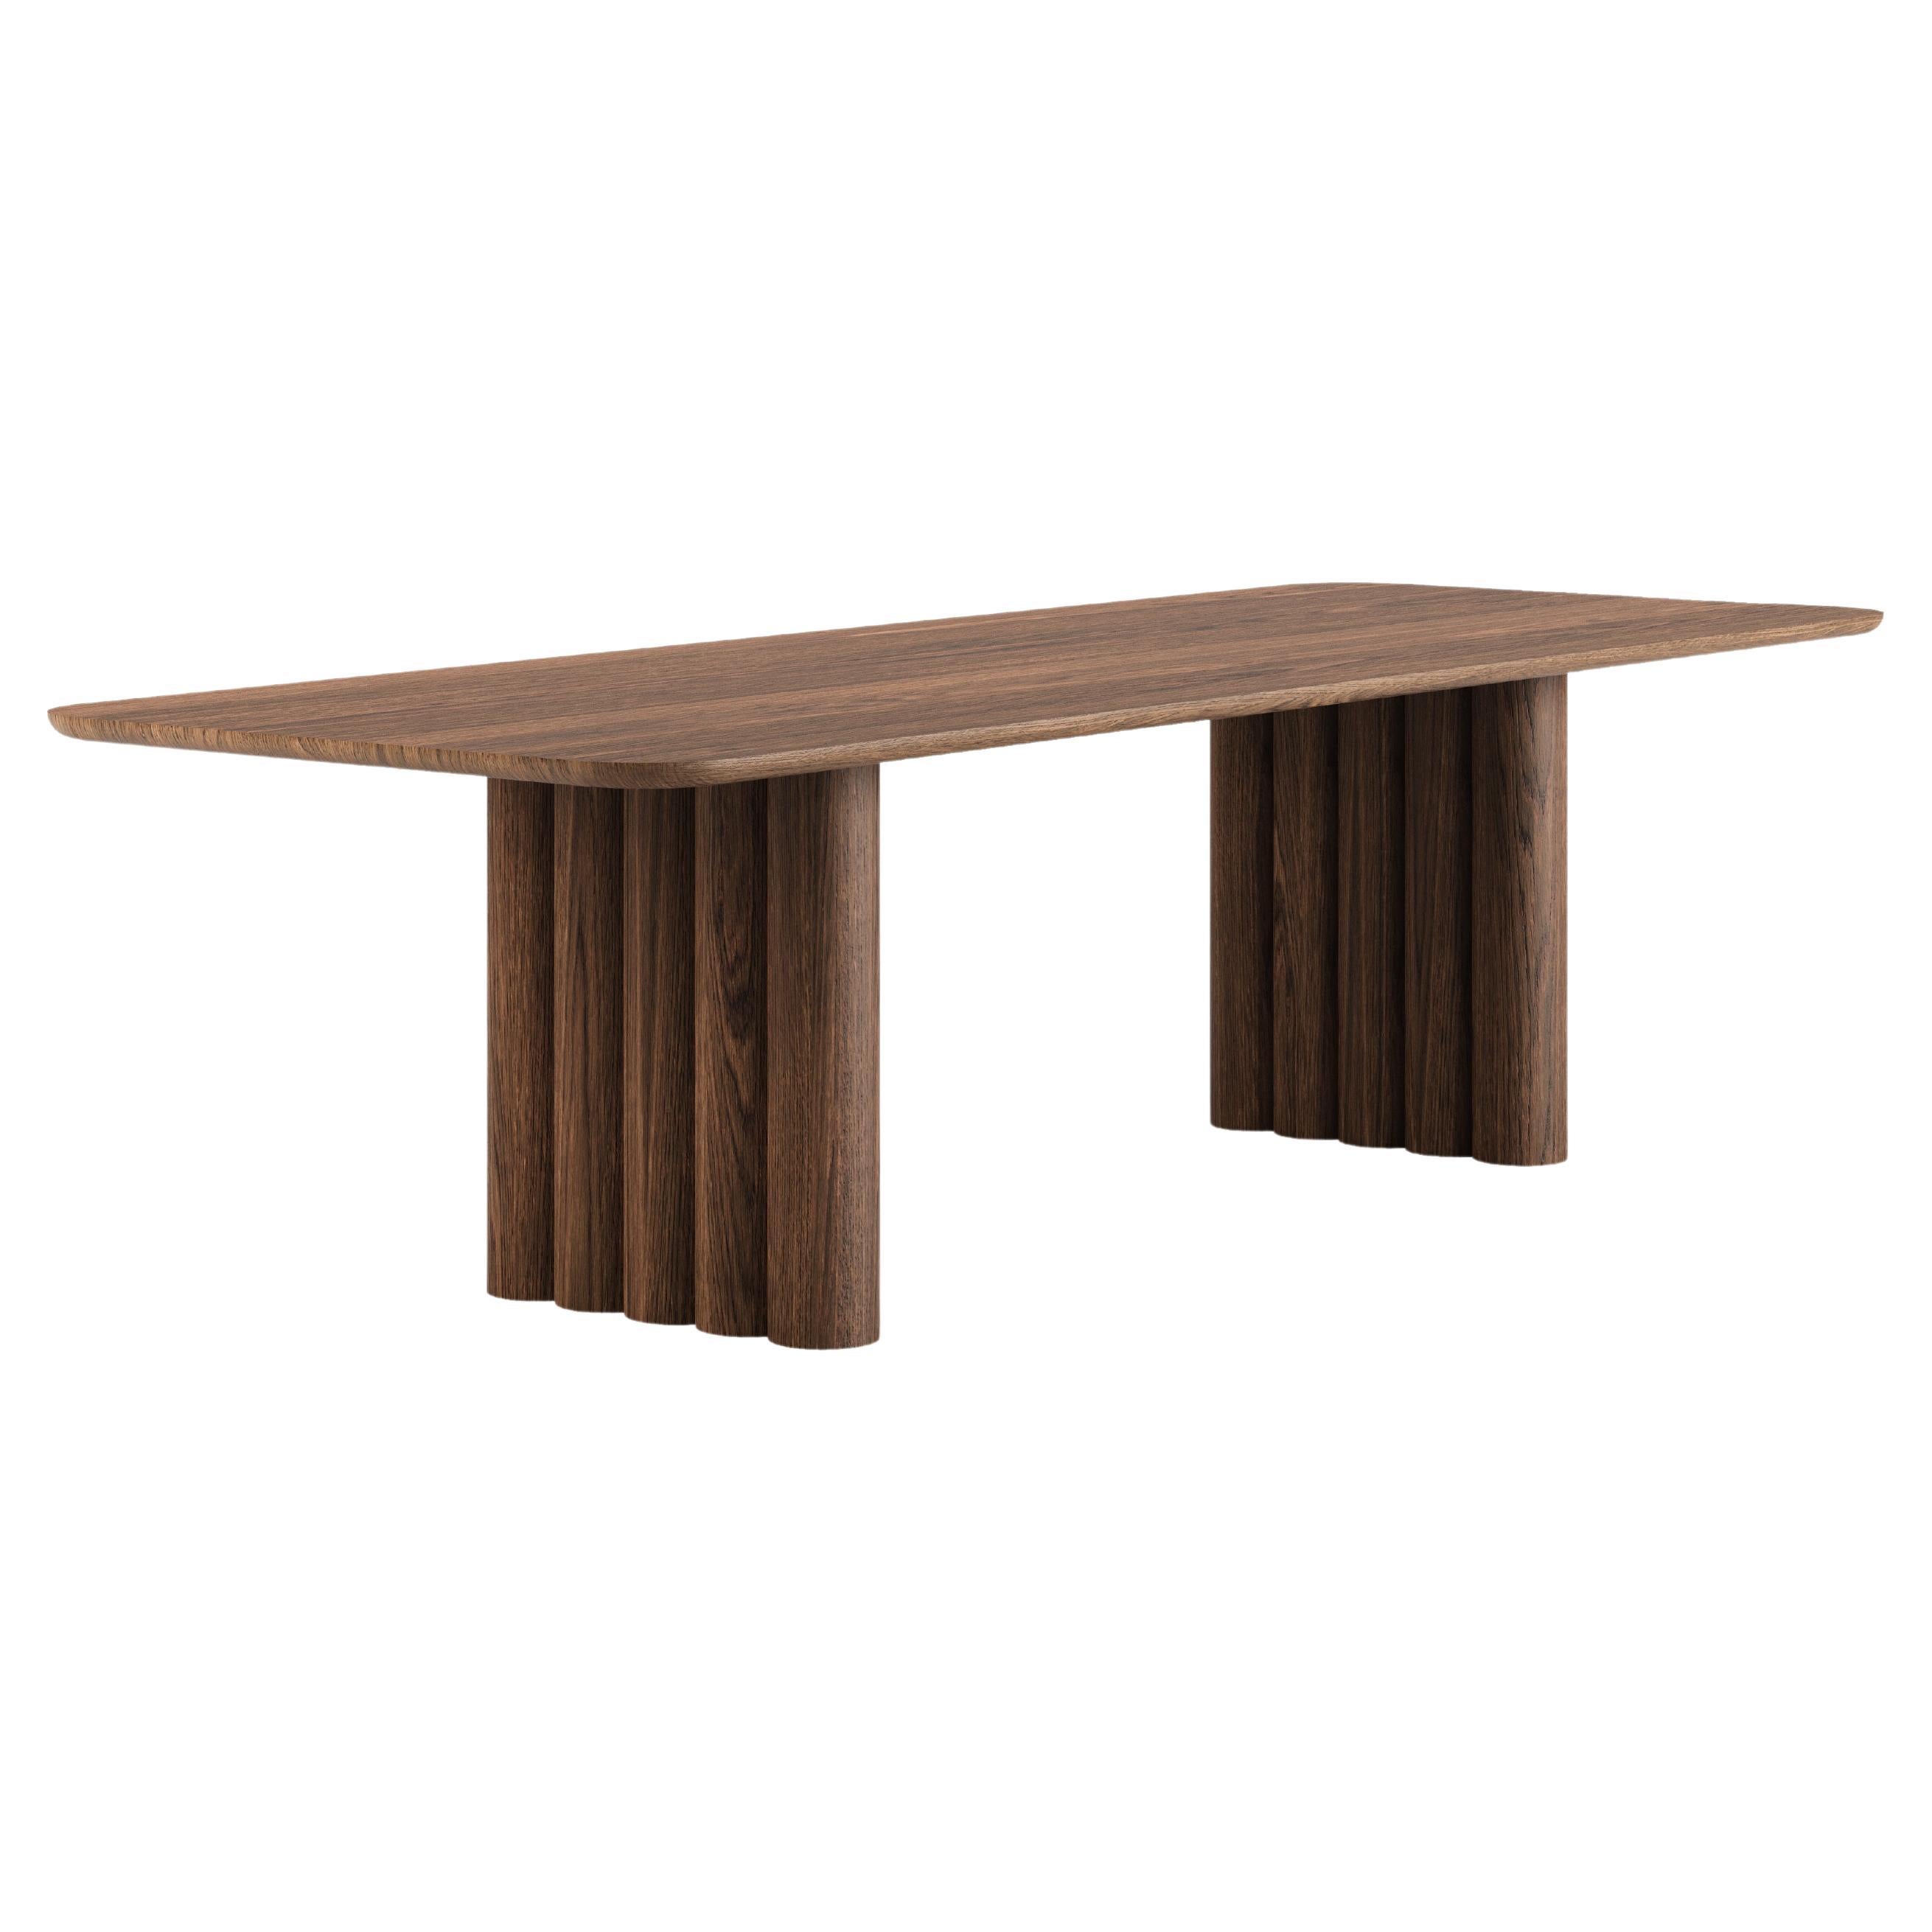 Rectangular Dining Table 'Plush' by Dk3, Smoked Oak or Walnut, 200 For Sale